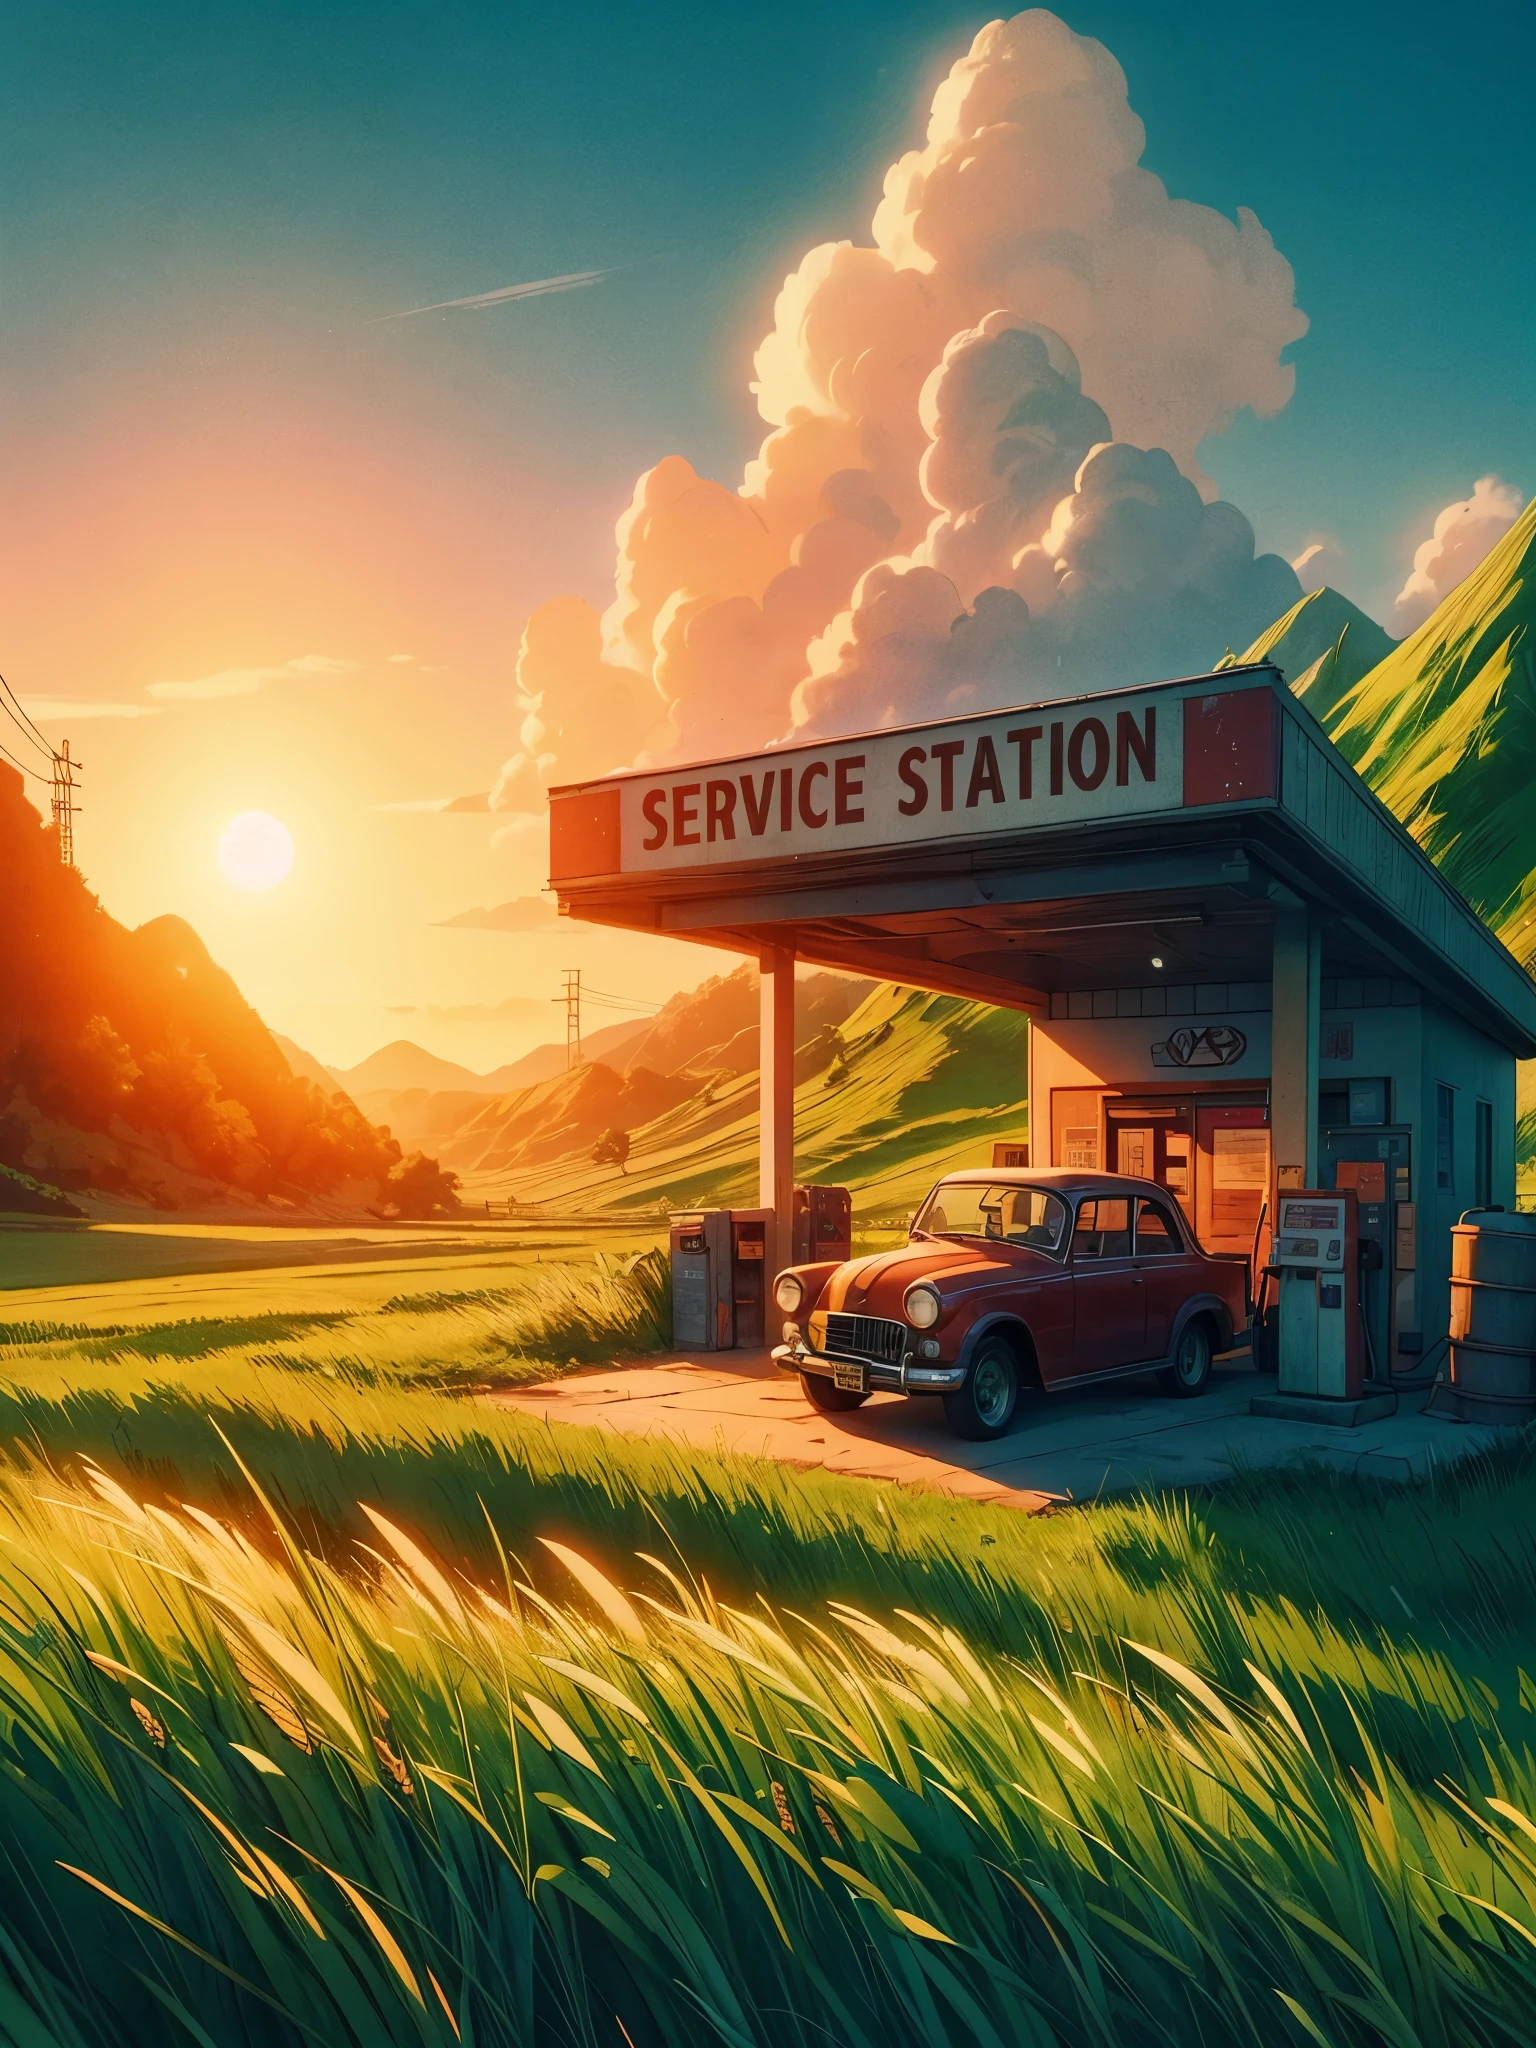 Draw a digital anime simple art scene of service station in green grass field, A vintage retro card parked beside, long grass, the sunset casts a warm glow across the vast, untamed landscape. The rugged beauty of the terrain unfolds, no humans and cattle, vibrant color tones